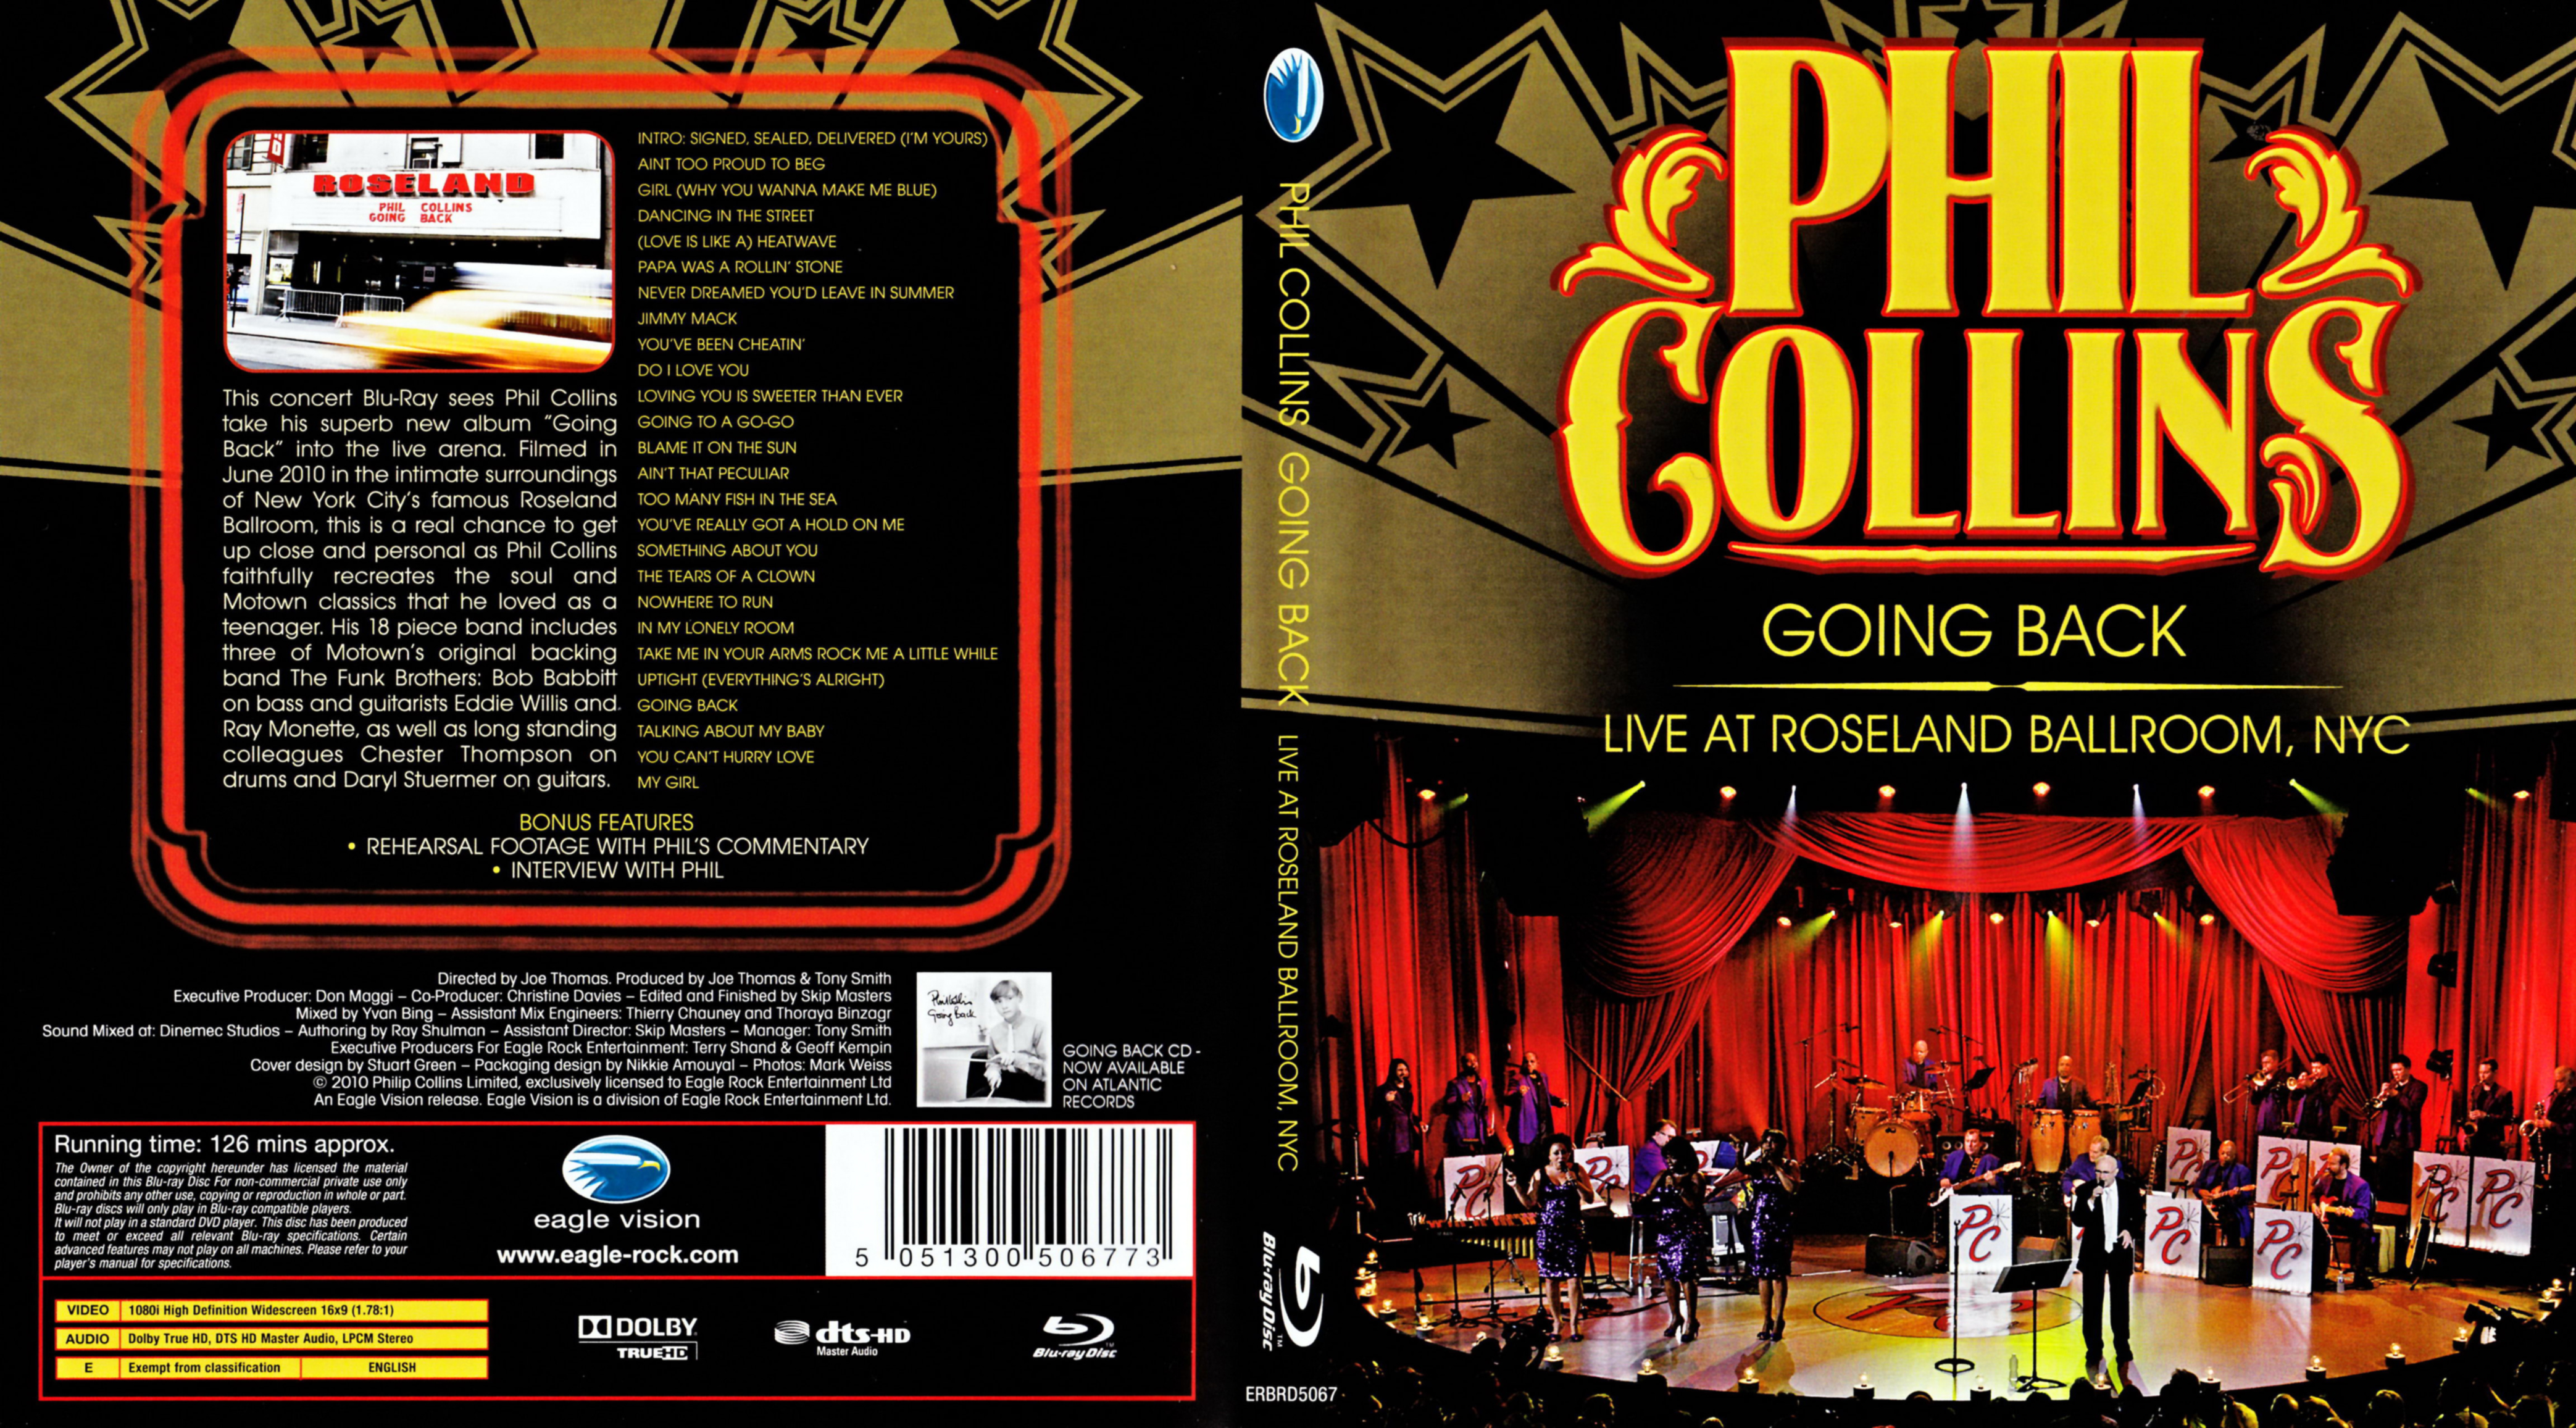 Jaquette DVD Phil Collins - Going back (BLU-RAY)